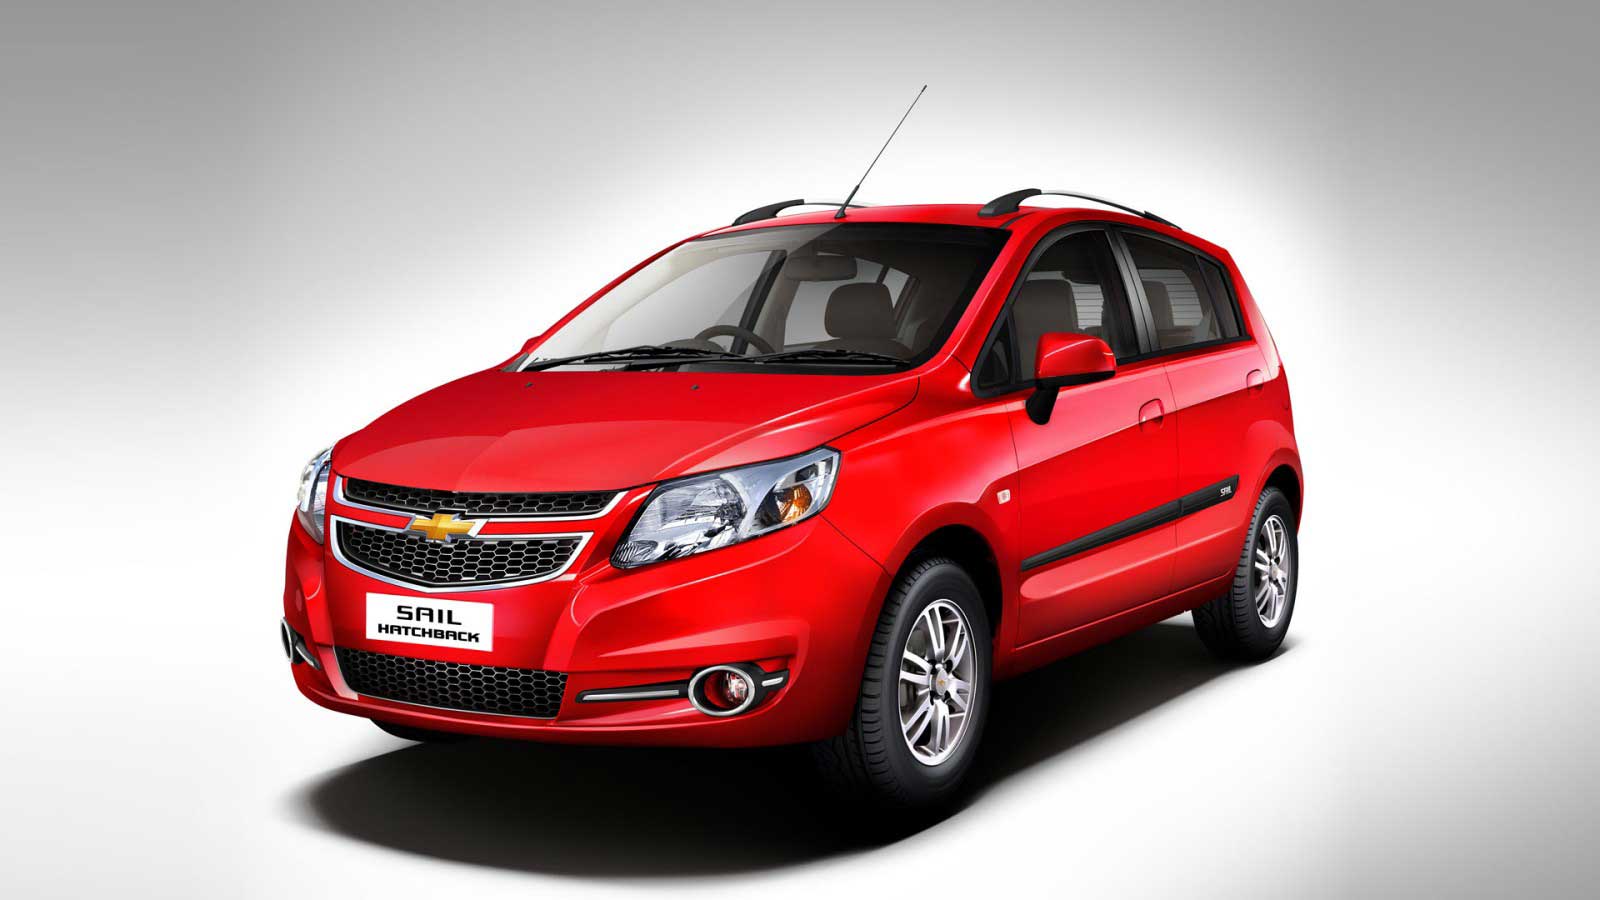 Chevrolet Sail Hatchback 1.3 LS ABS Exterior front cross view